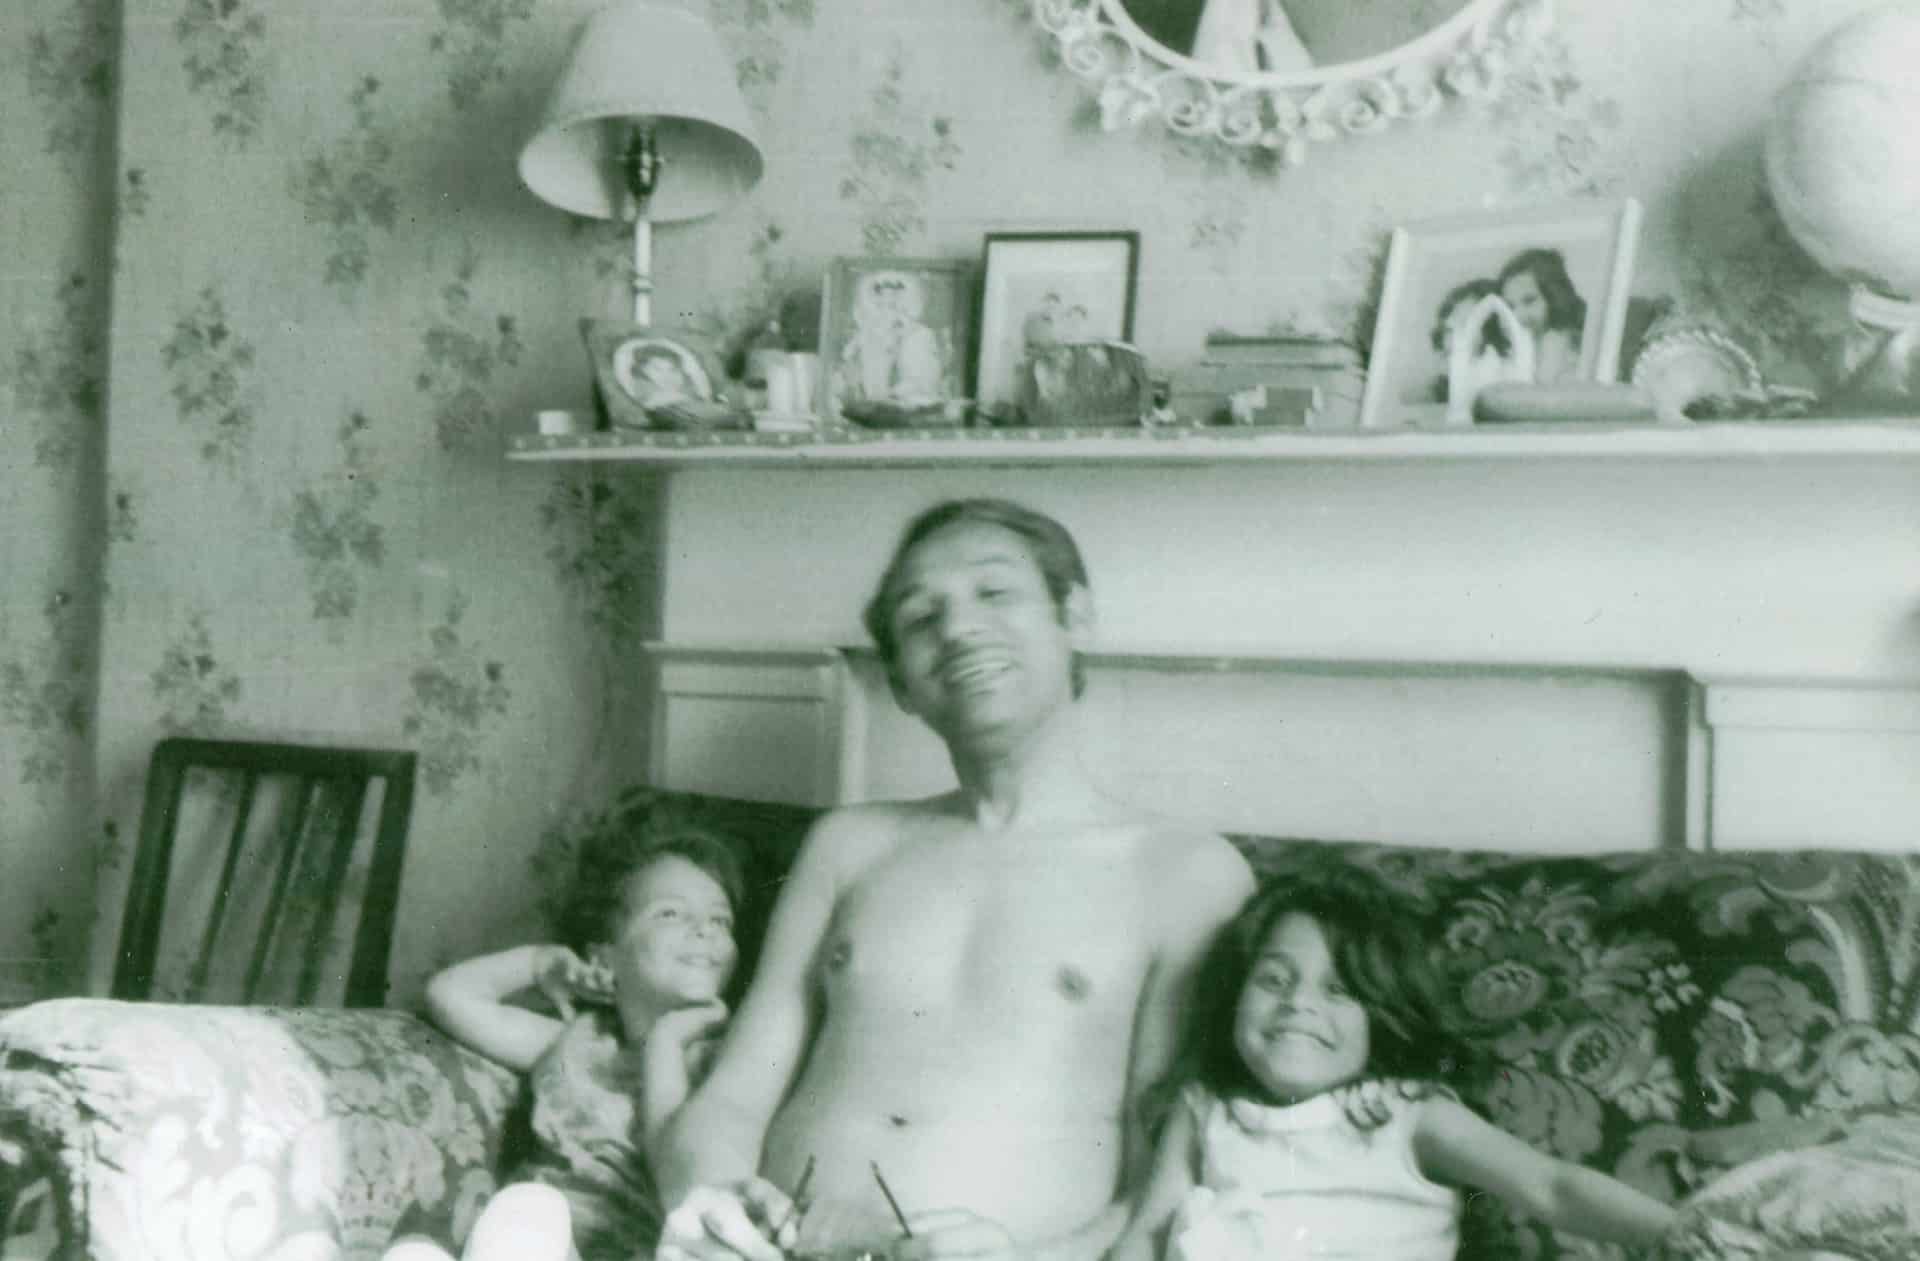 Marianne and her sister with her father in London in the 1960s.
'This is when we lived in 101 Highfield Road in London, we privately rented a room and it was a time when black African Caribbean and Asian people shared houses.'